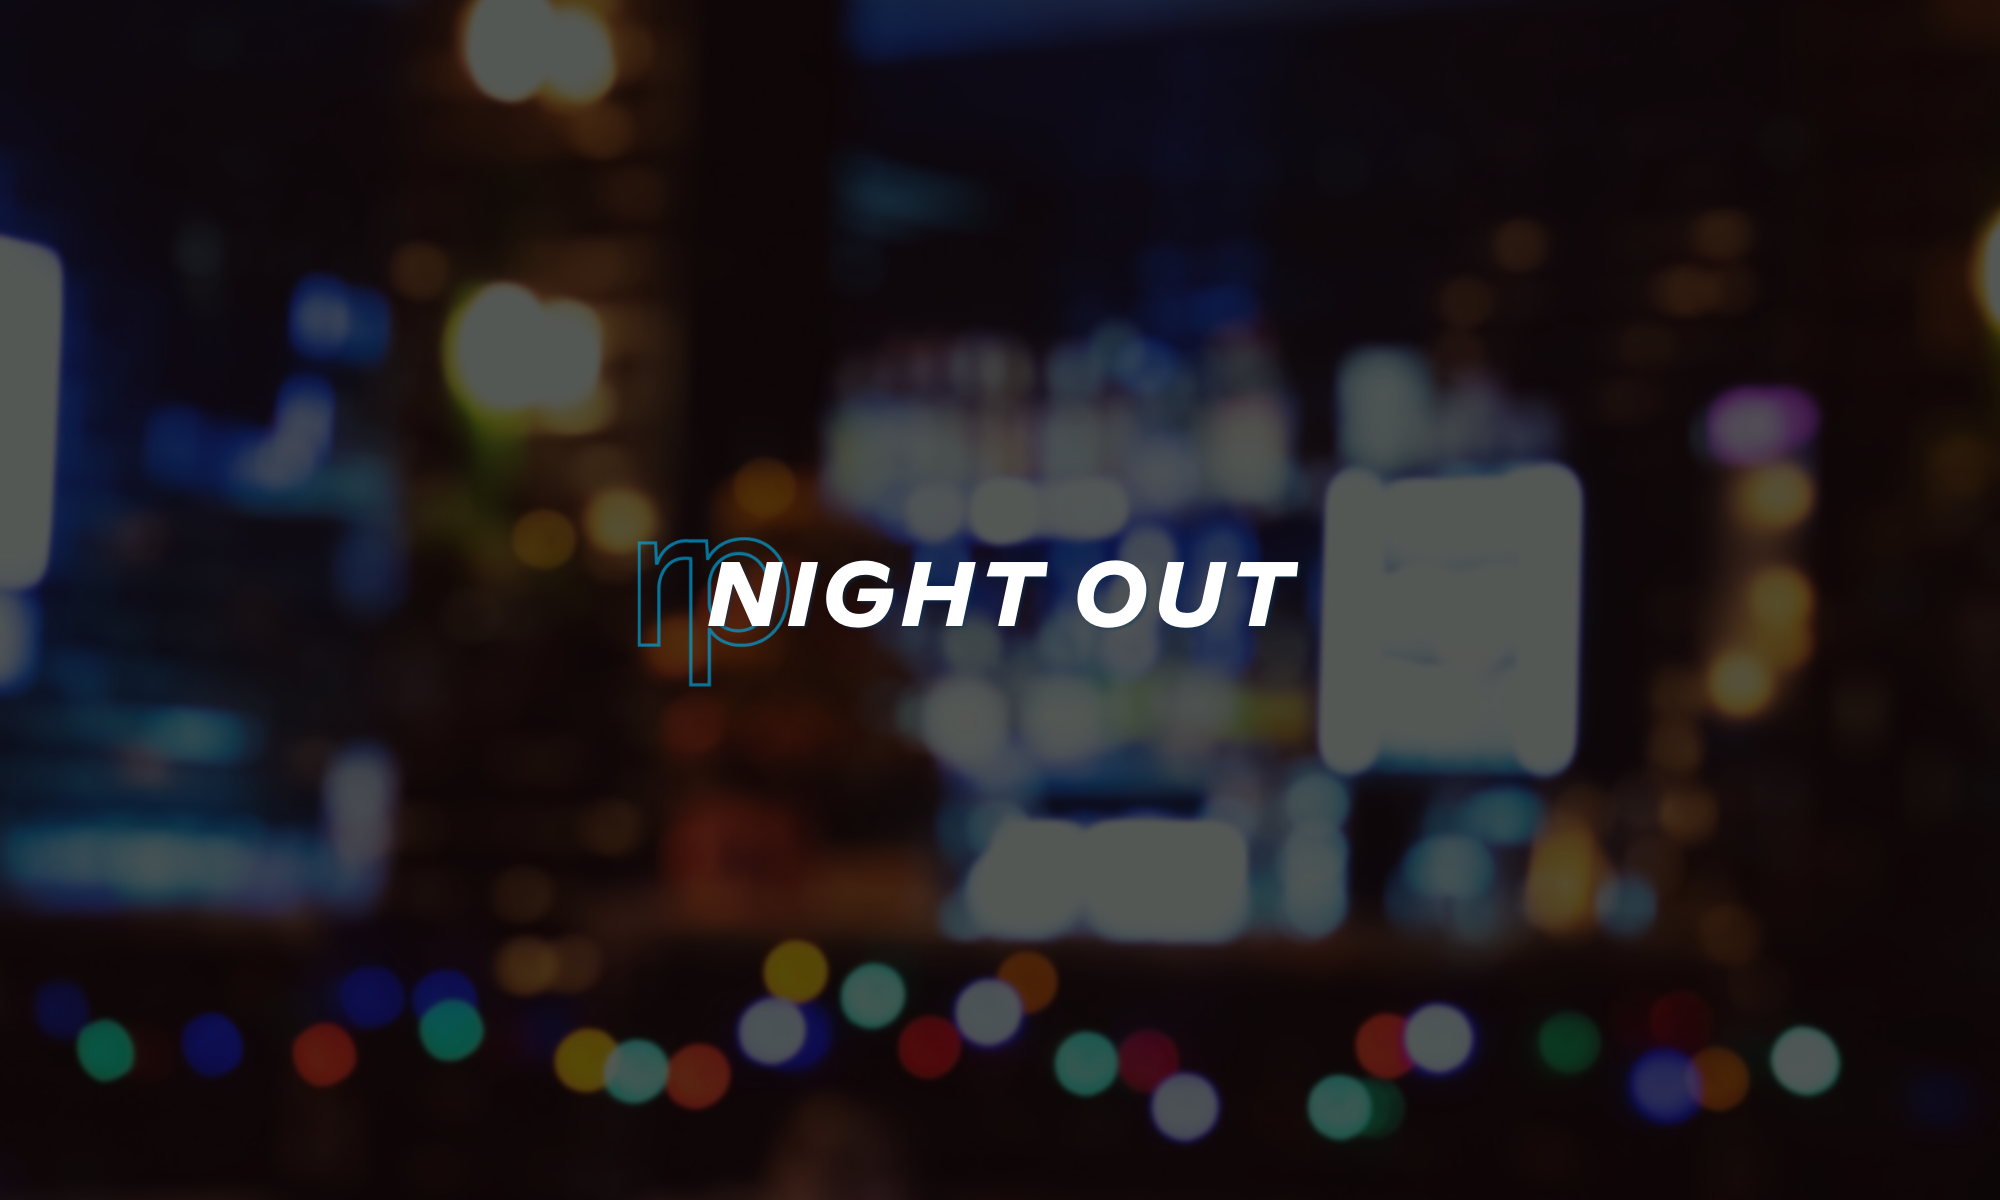 RP Night Out is back!